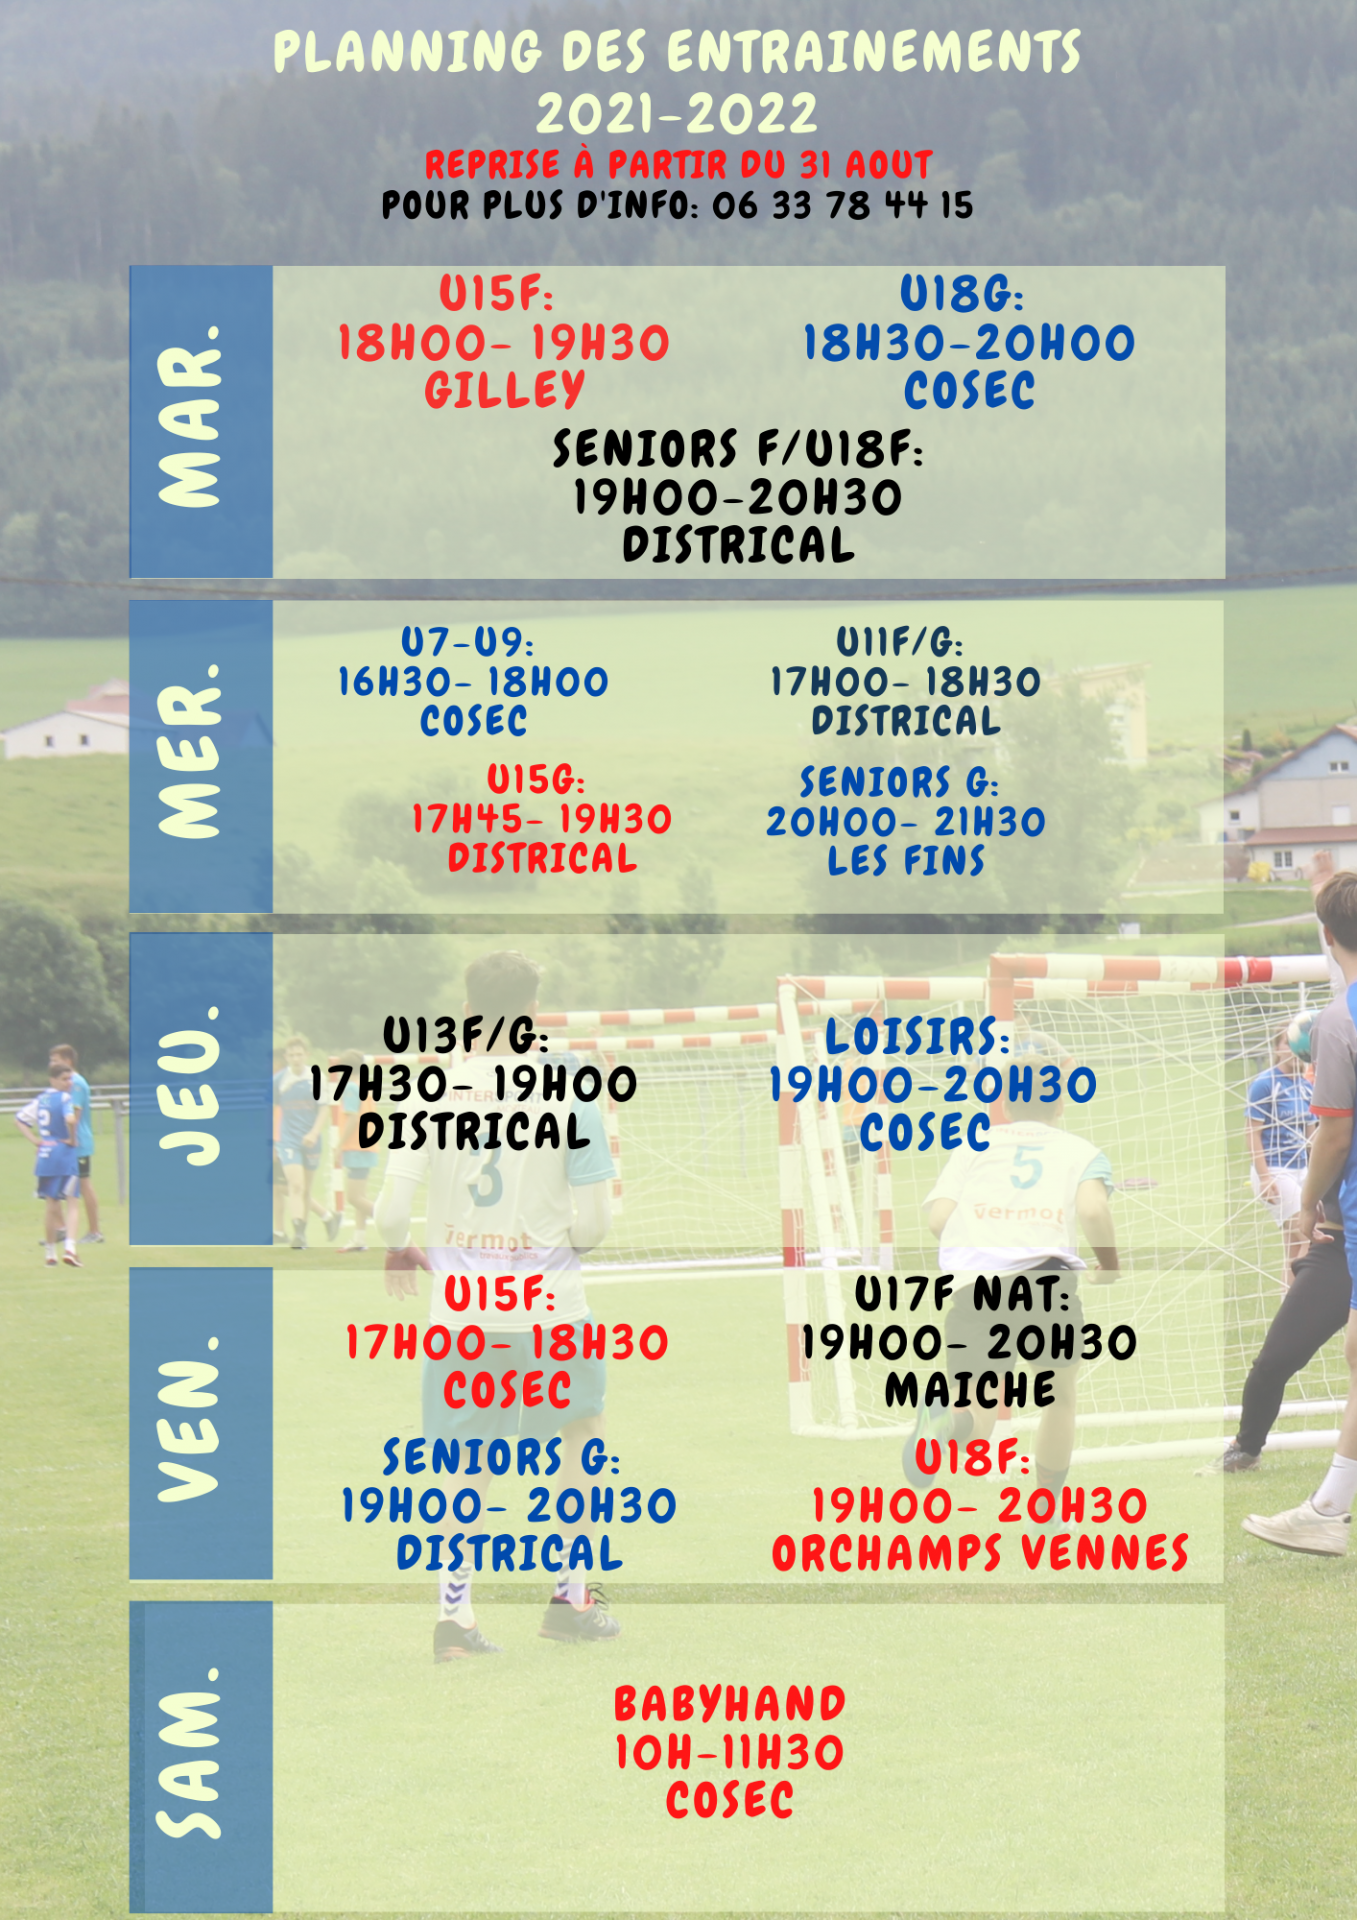 Planing entrainement 2021 2022